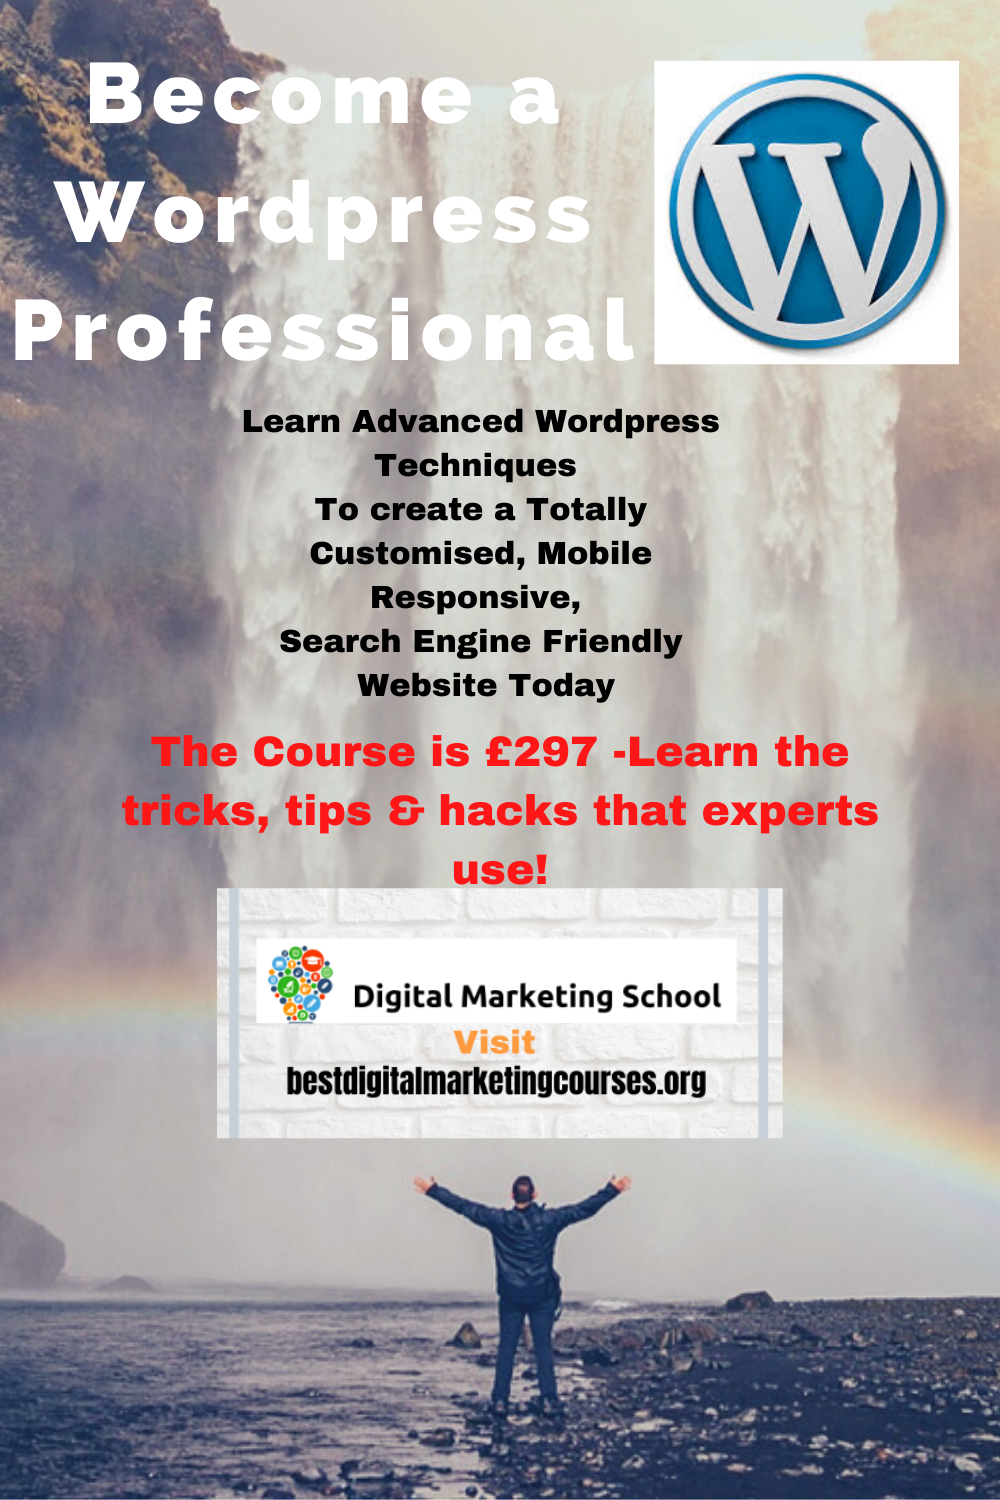 What Everybody Should Know About WordPress & Getting Professional With it!